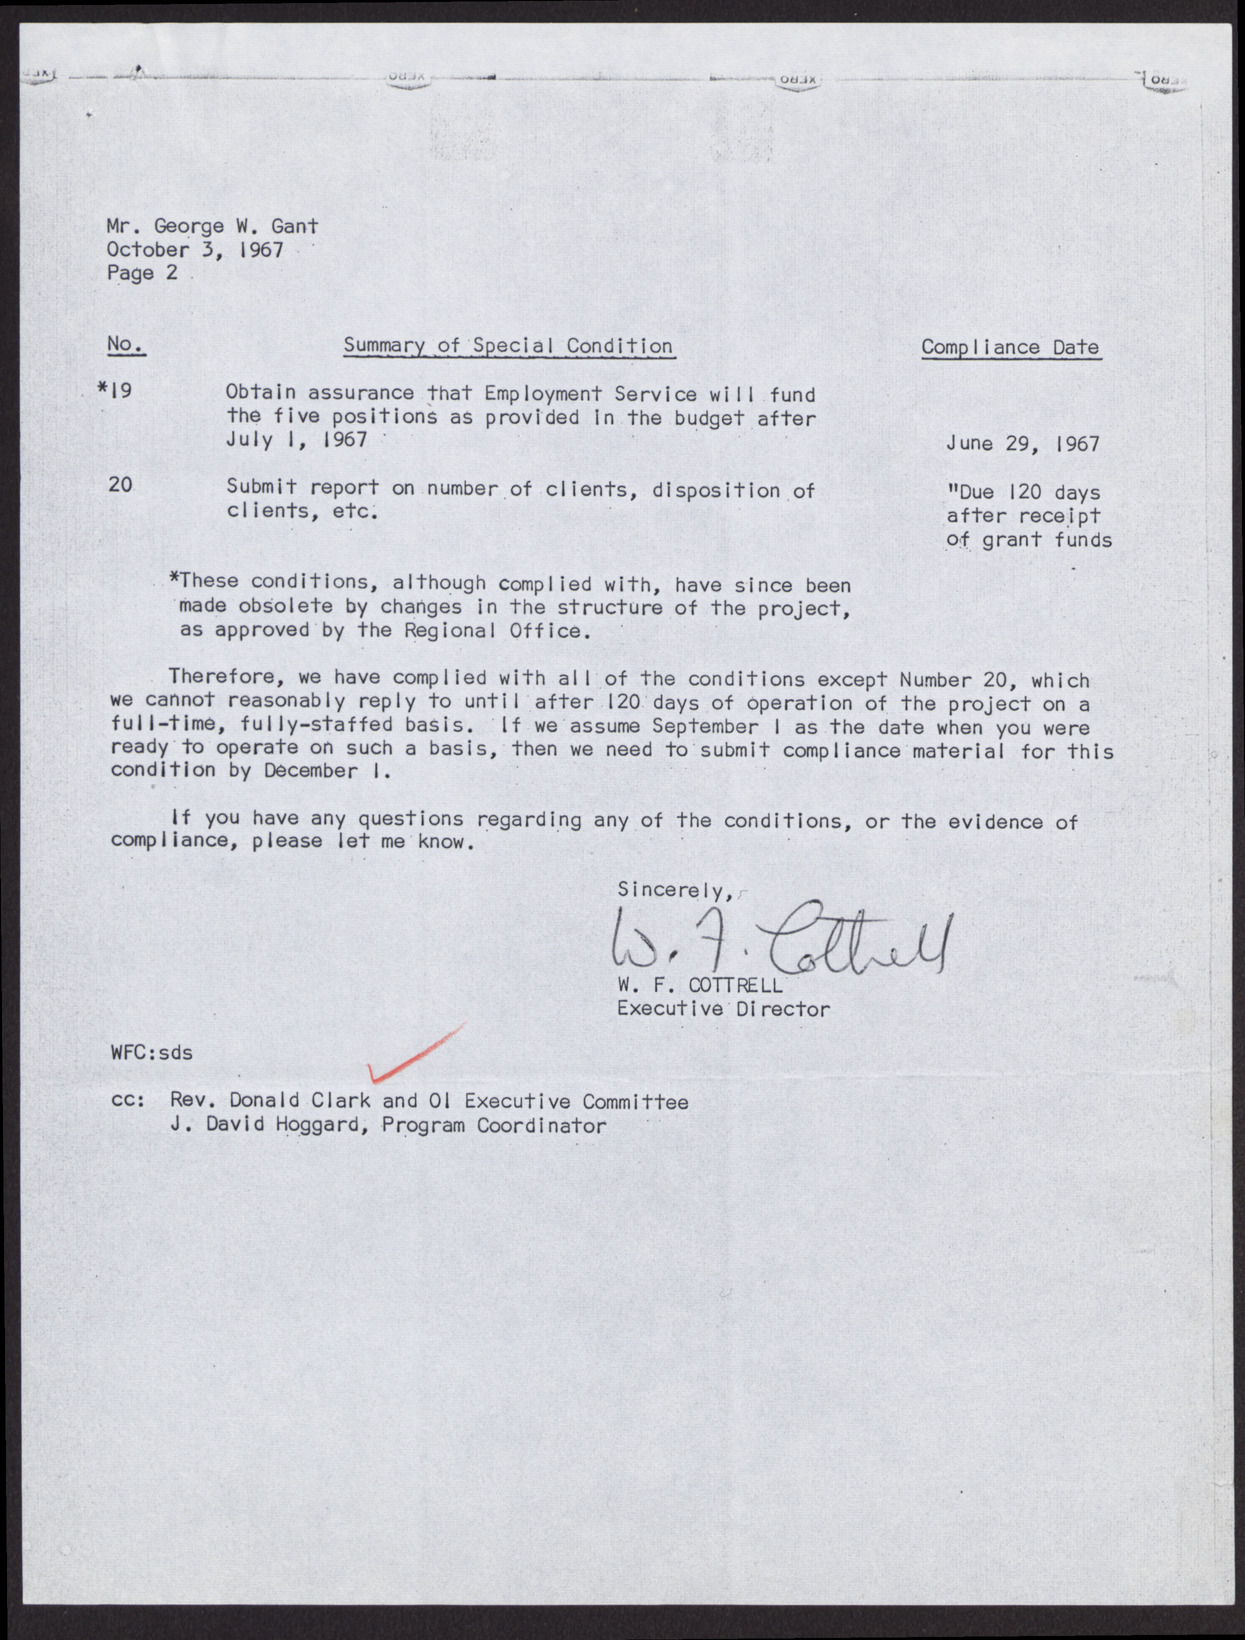 Letter Mr. George W. Gant from W. F. Cottrell, October 3, 1967, page 2